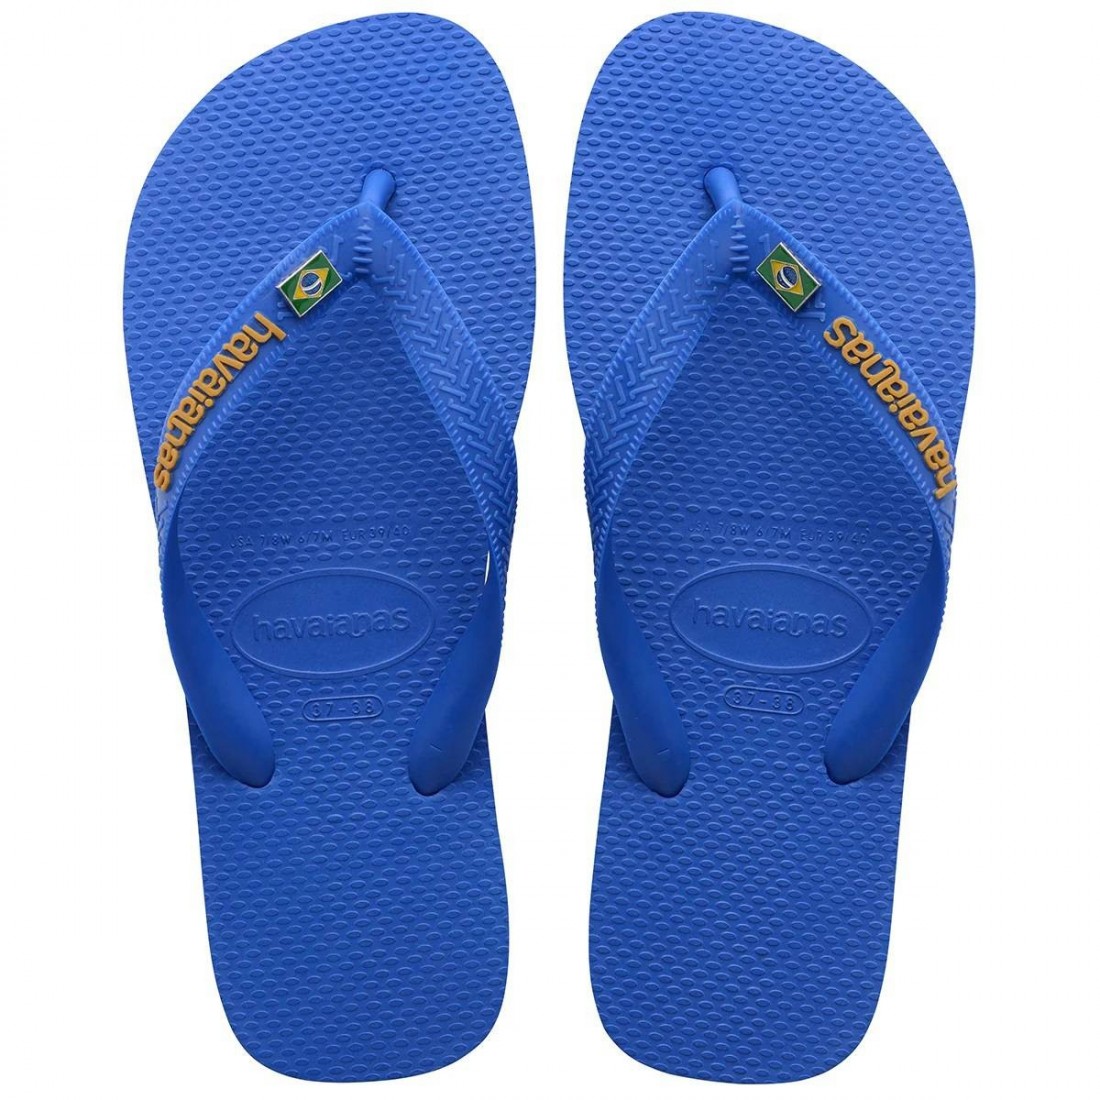 Shop Havaianas Brasil Layers Blue Star - Havaianas, delivered to your ...